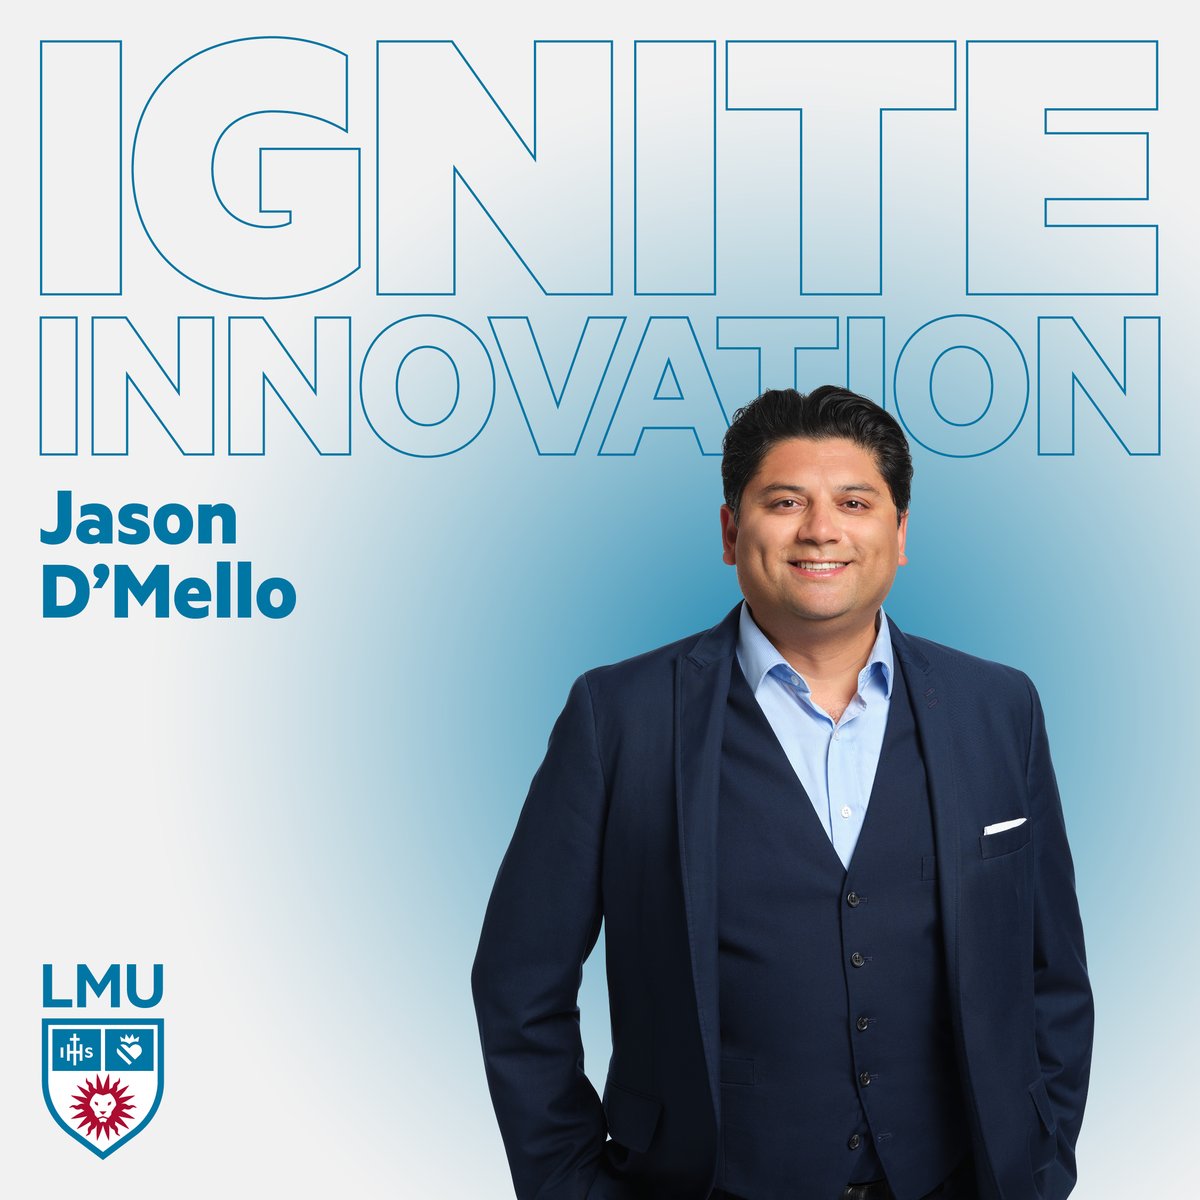 Ignite innovation. 💡

As head of LMU’s Business Incubator, Jason D’Mello, @lmucba associate professor of entrepreneurship, empowers students to discover the start-up process and prepare to launch their businesses: bit.ly/LMU_DMello

#LMUignite